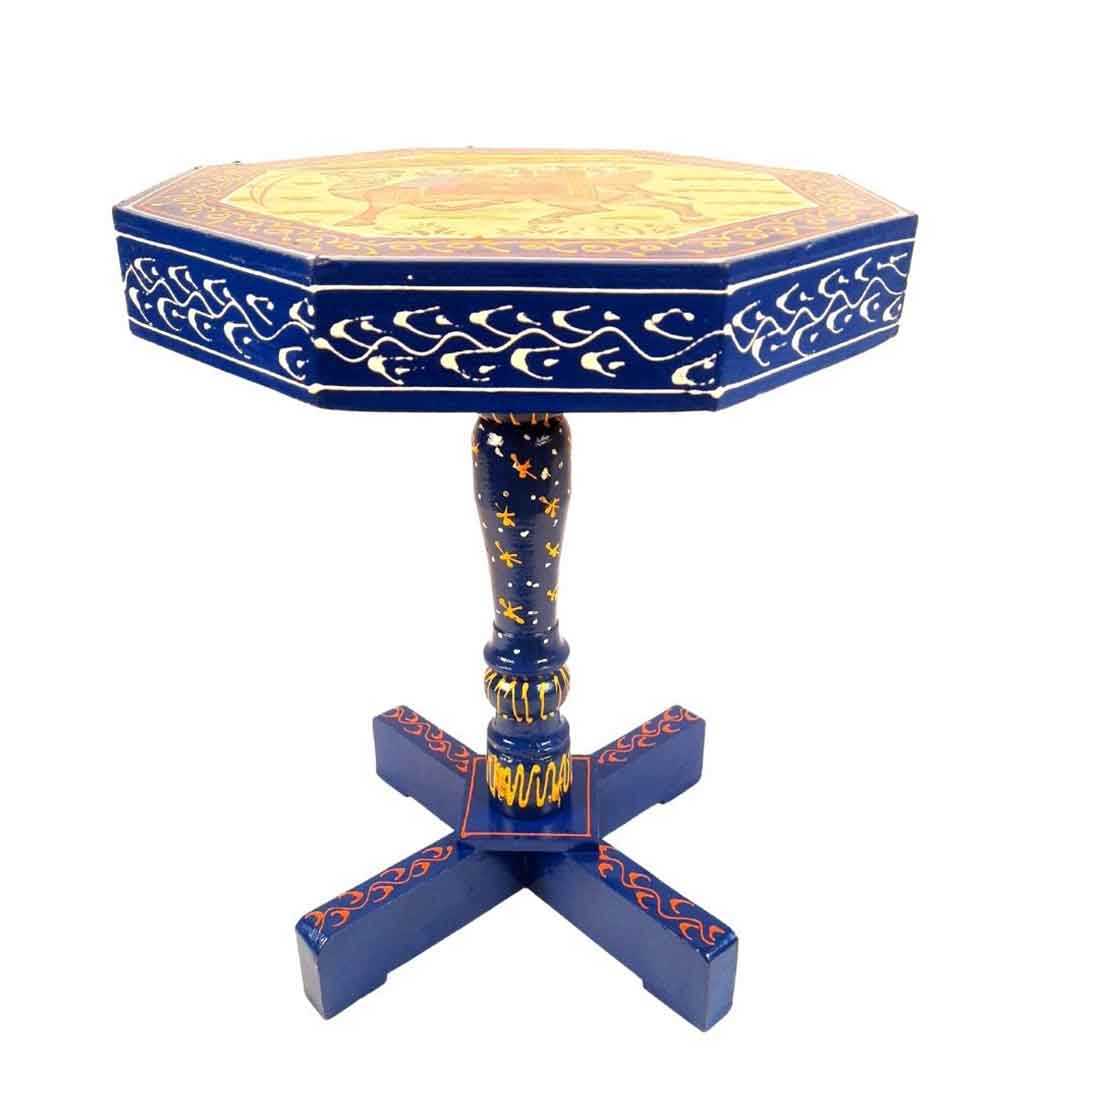 Coffee Tables for Living Room | Small Tables for Home Decor & Gifts - 16 Inch - ApkaMart